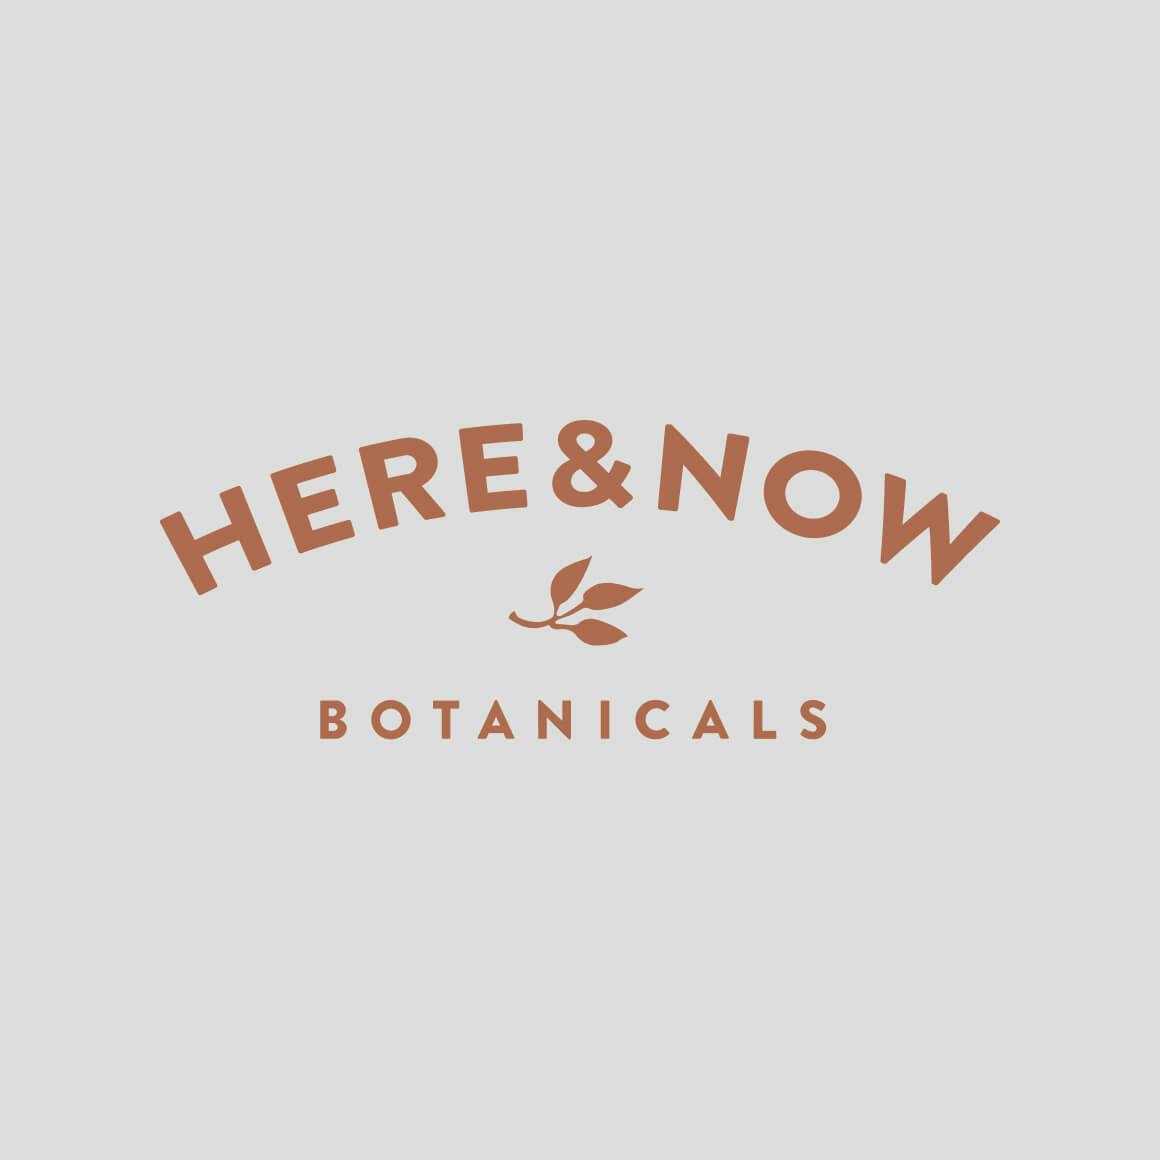 Logo design for Here & Now, an aromatherapy oil botanical brand.